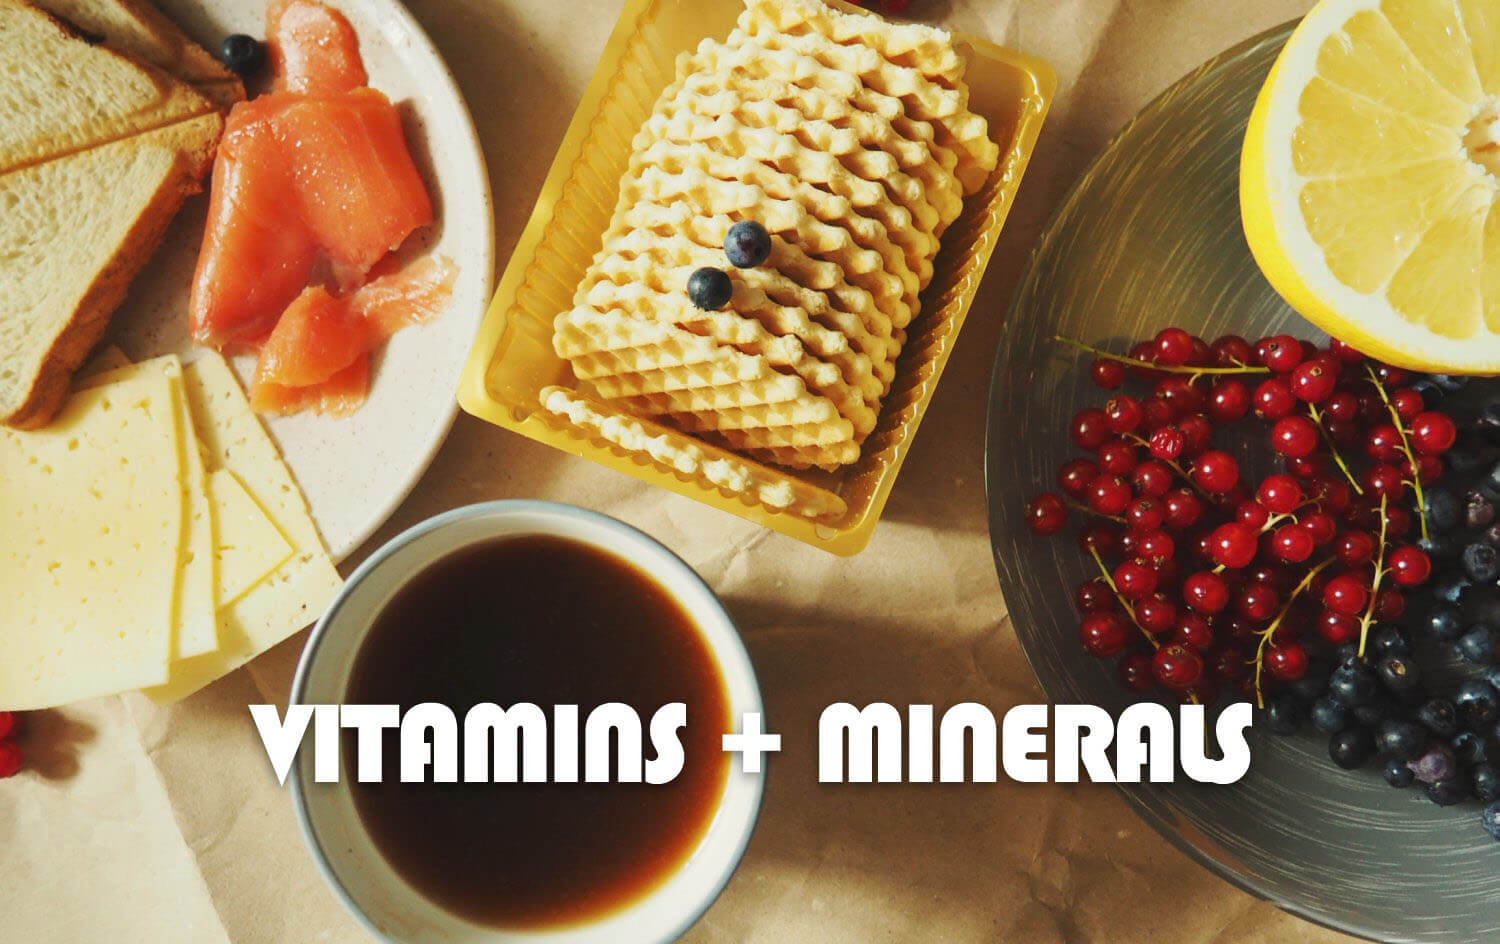 What Are Vitamins and Minerals and Why Are They Important?